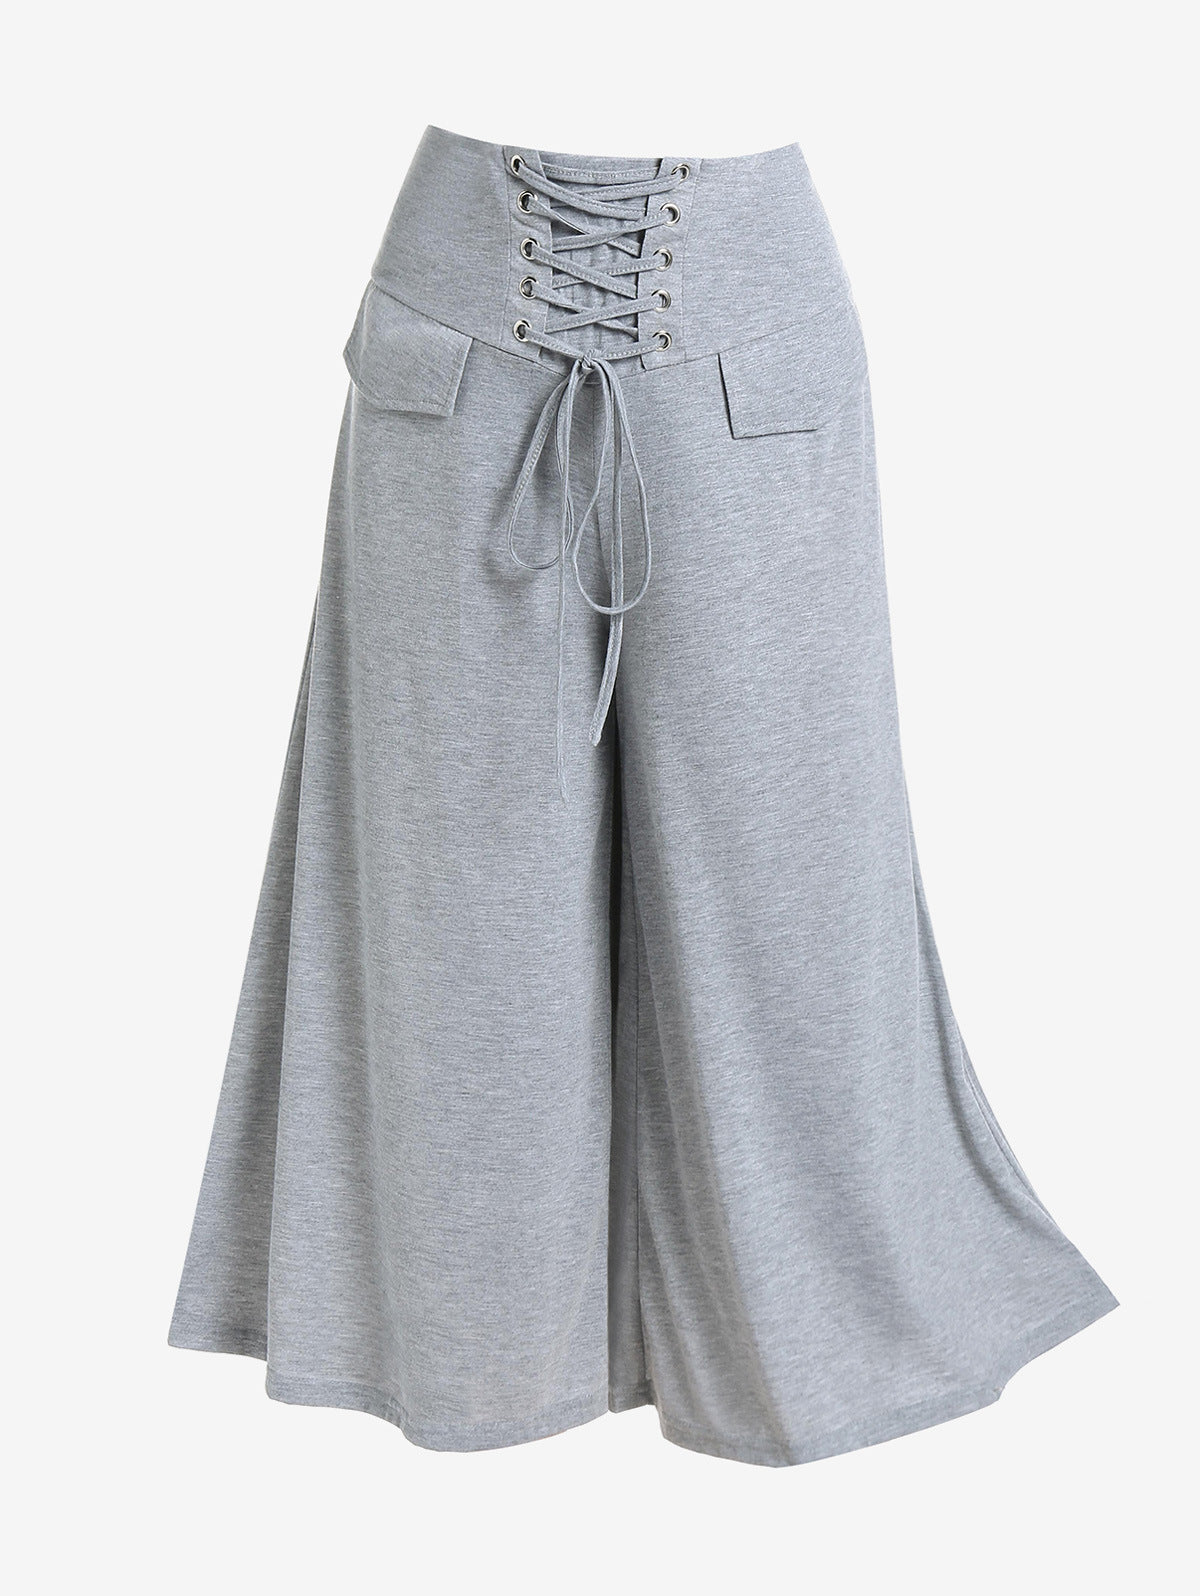 Pants  | Women's Clothing High Waist With Straps Plus Size Loose Pants | |  | thecurvestory.myshopify.com